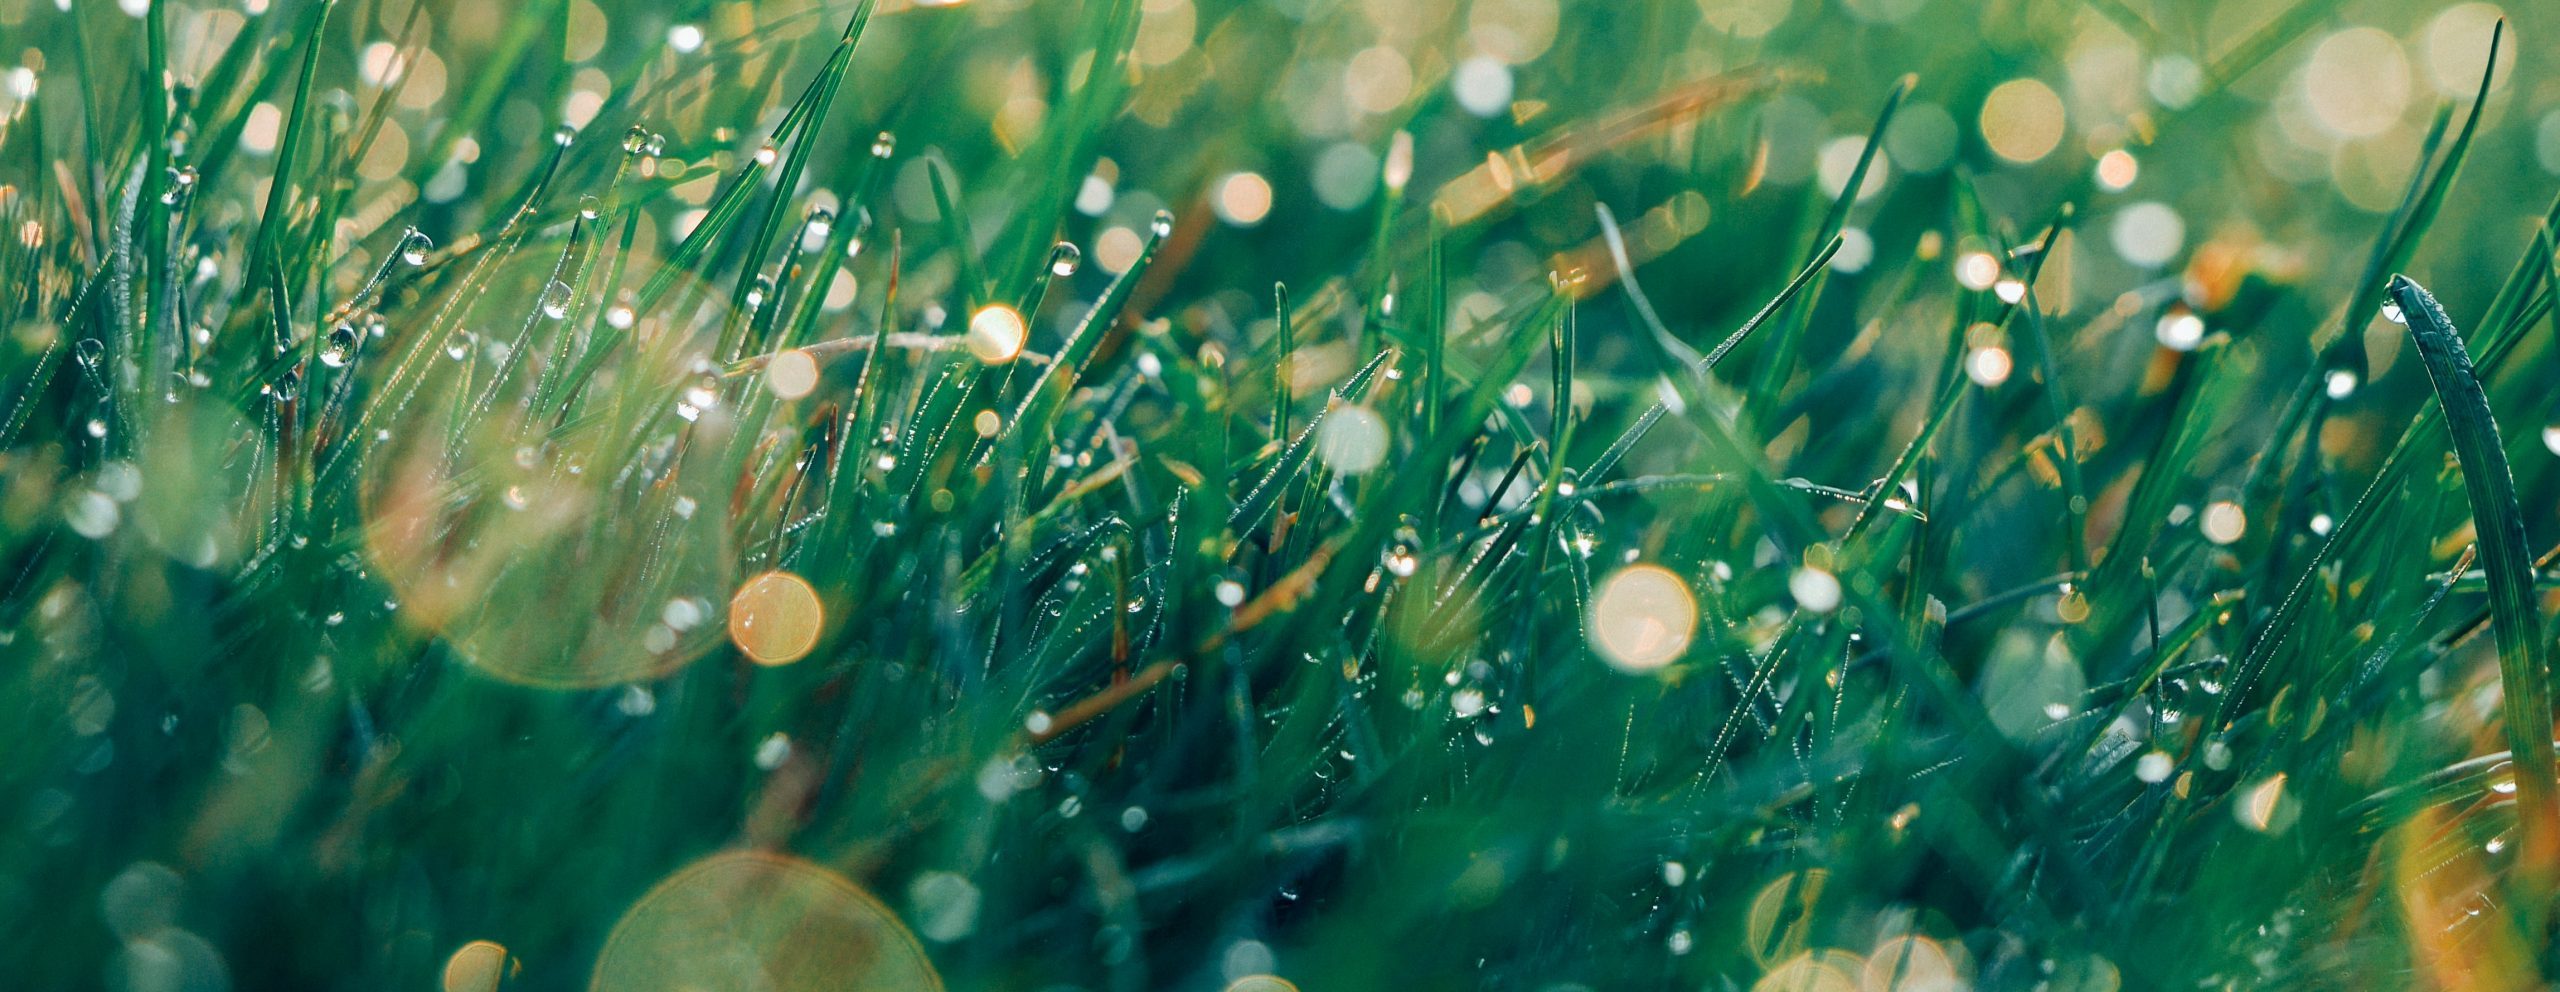 How Do Reel Mowers Handle Wet Grass? Tips for Safely Mowing After Rain